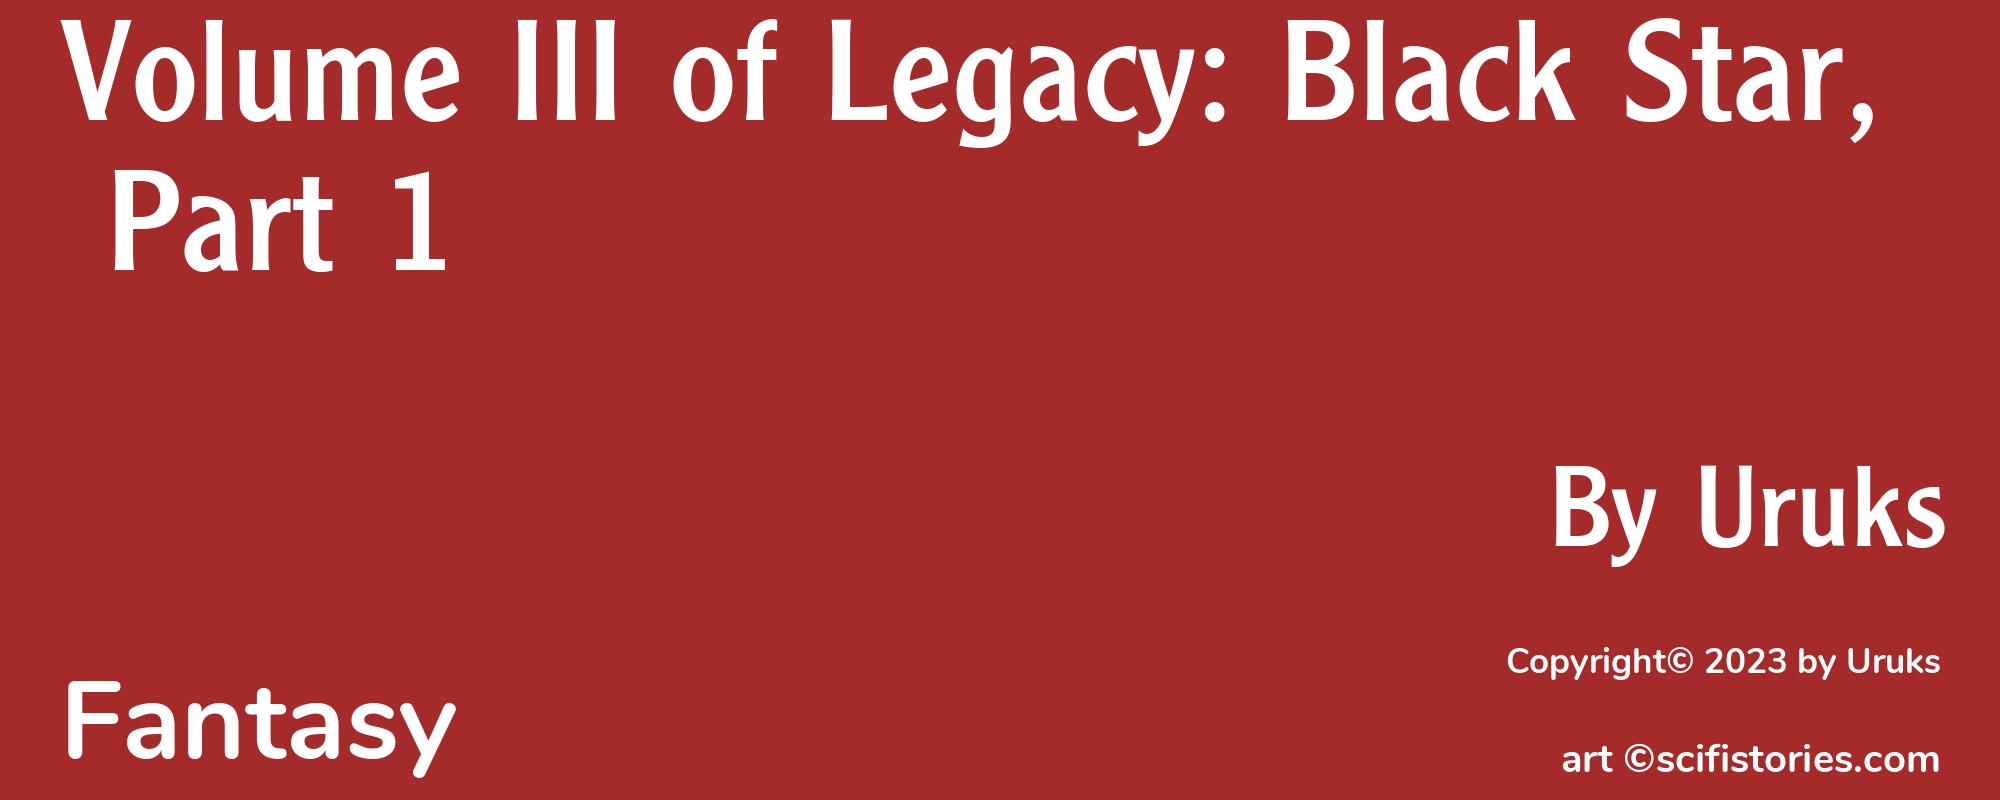 Volume III of Legacy: Black Star, Part 1 - Cover